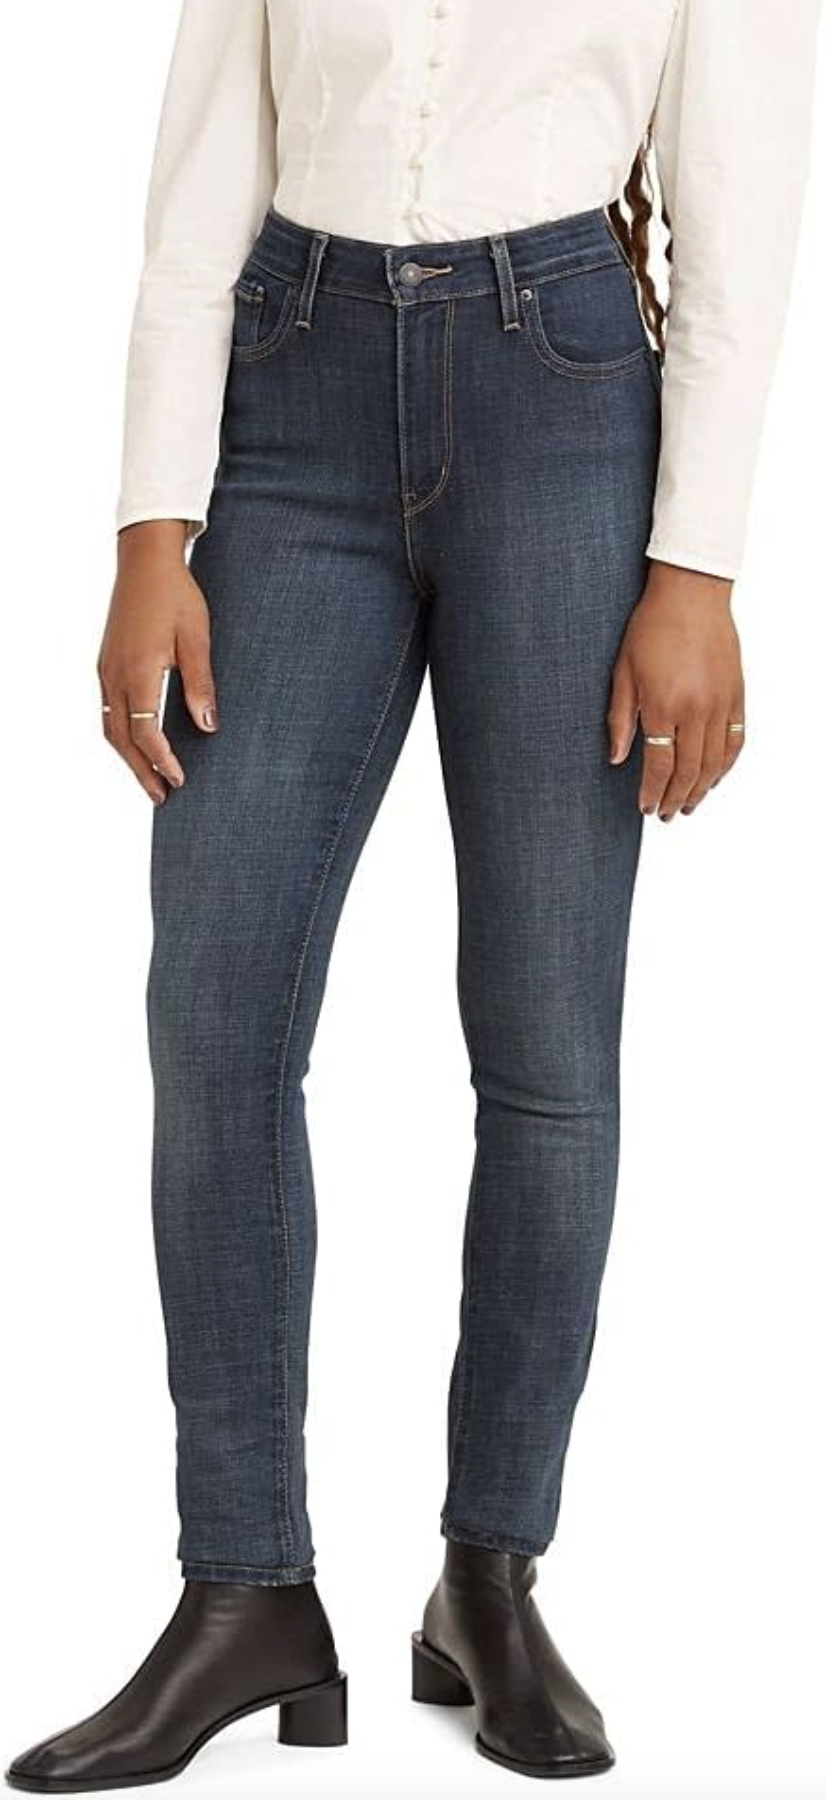 Offers on women's jeans 721 High Rise Skinny Jeans from Levi's